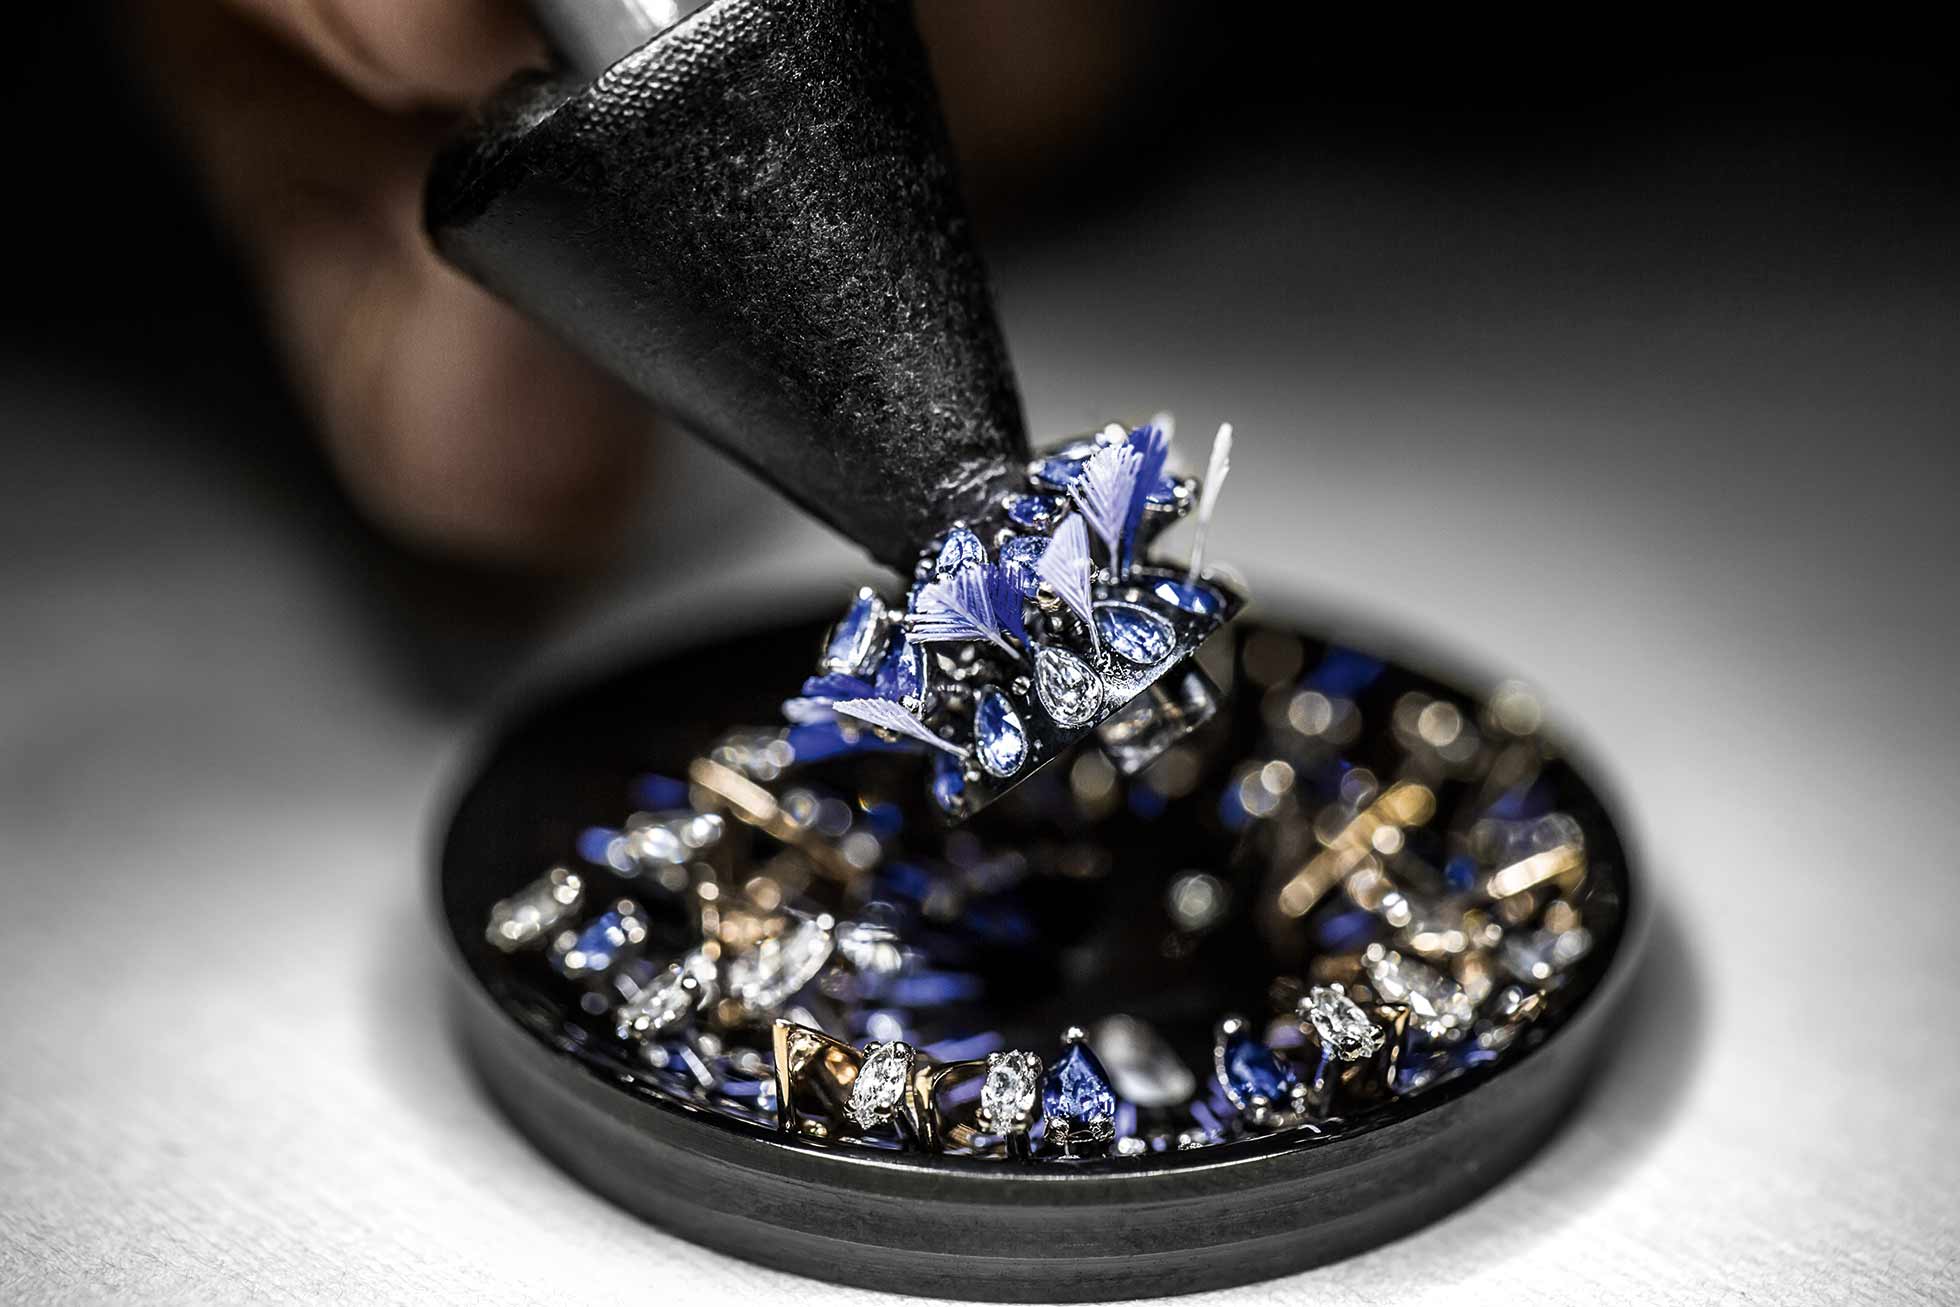 Diamonds, sapphires, gold and feathers are applied during the process of creating one of Dior’s ‘Grand Bal Jardins Imaginaires’ fine jewellery watches